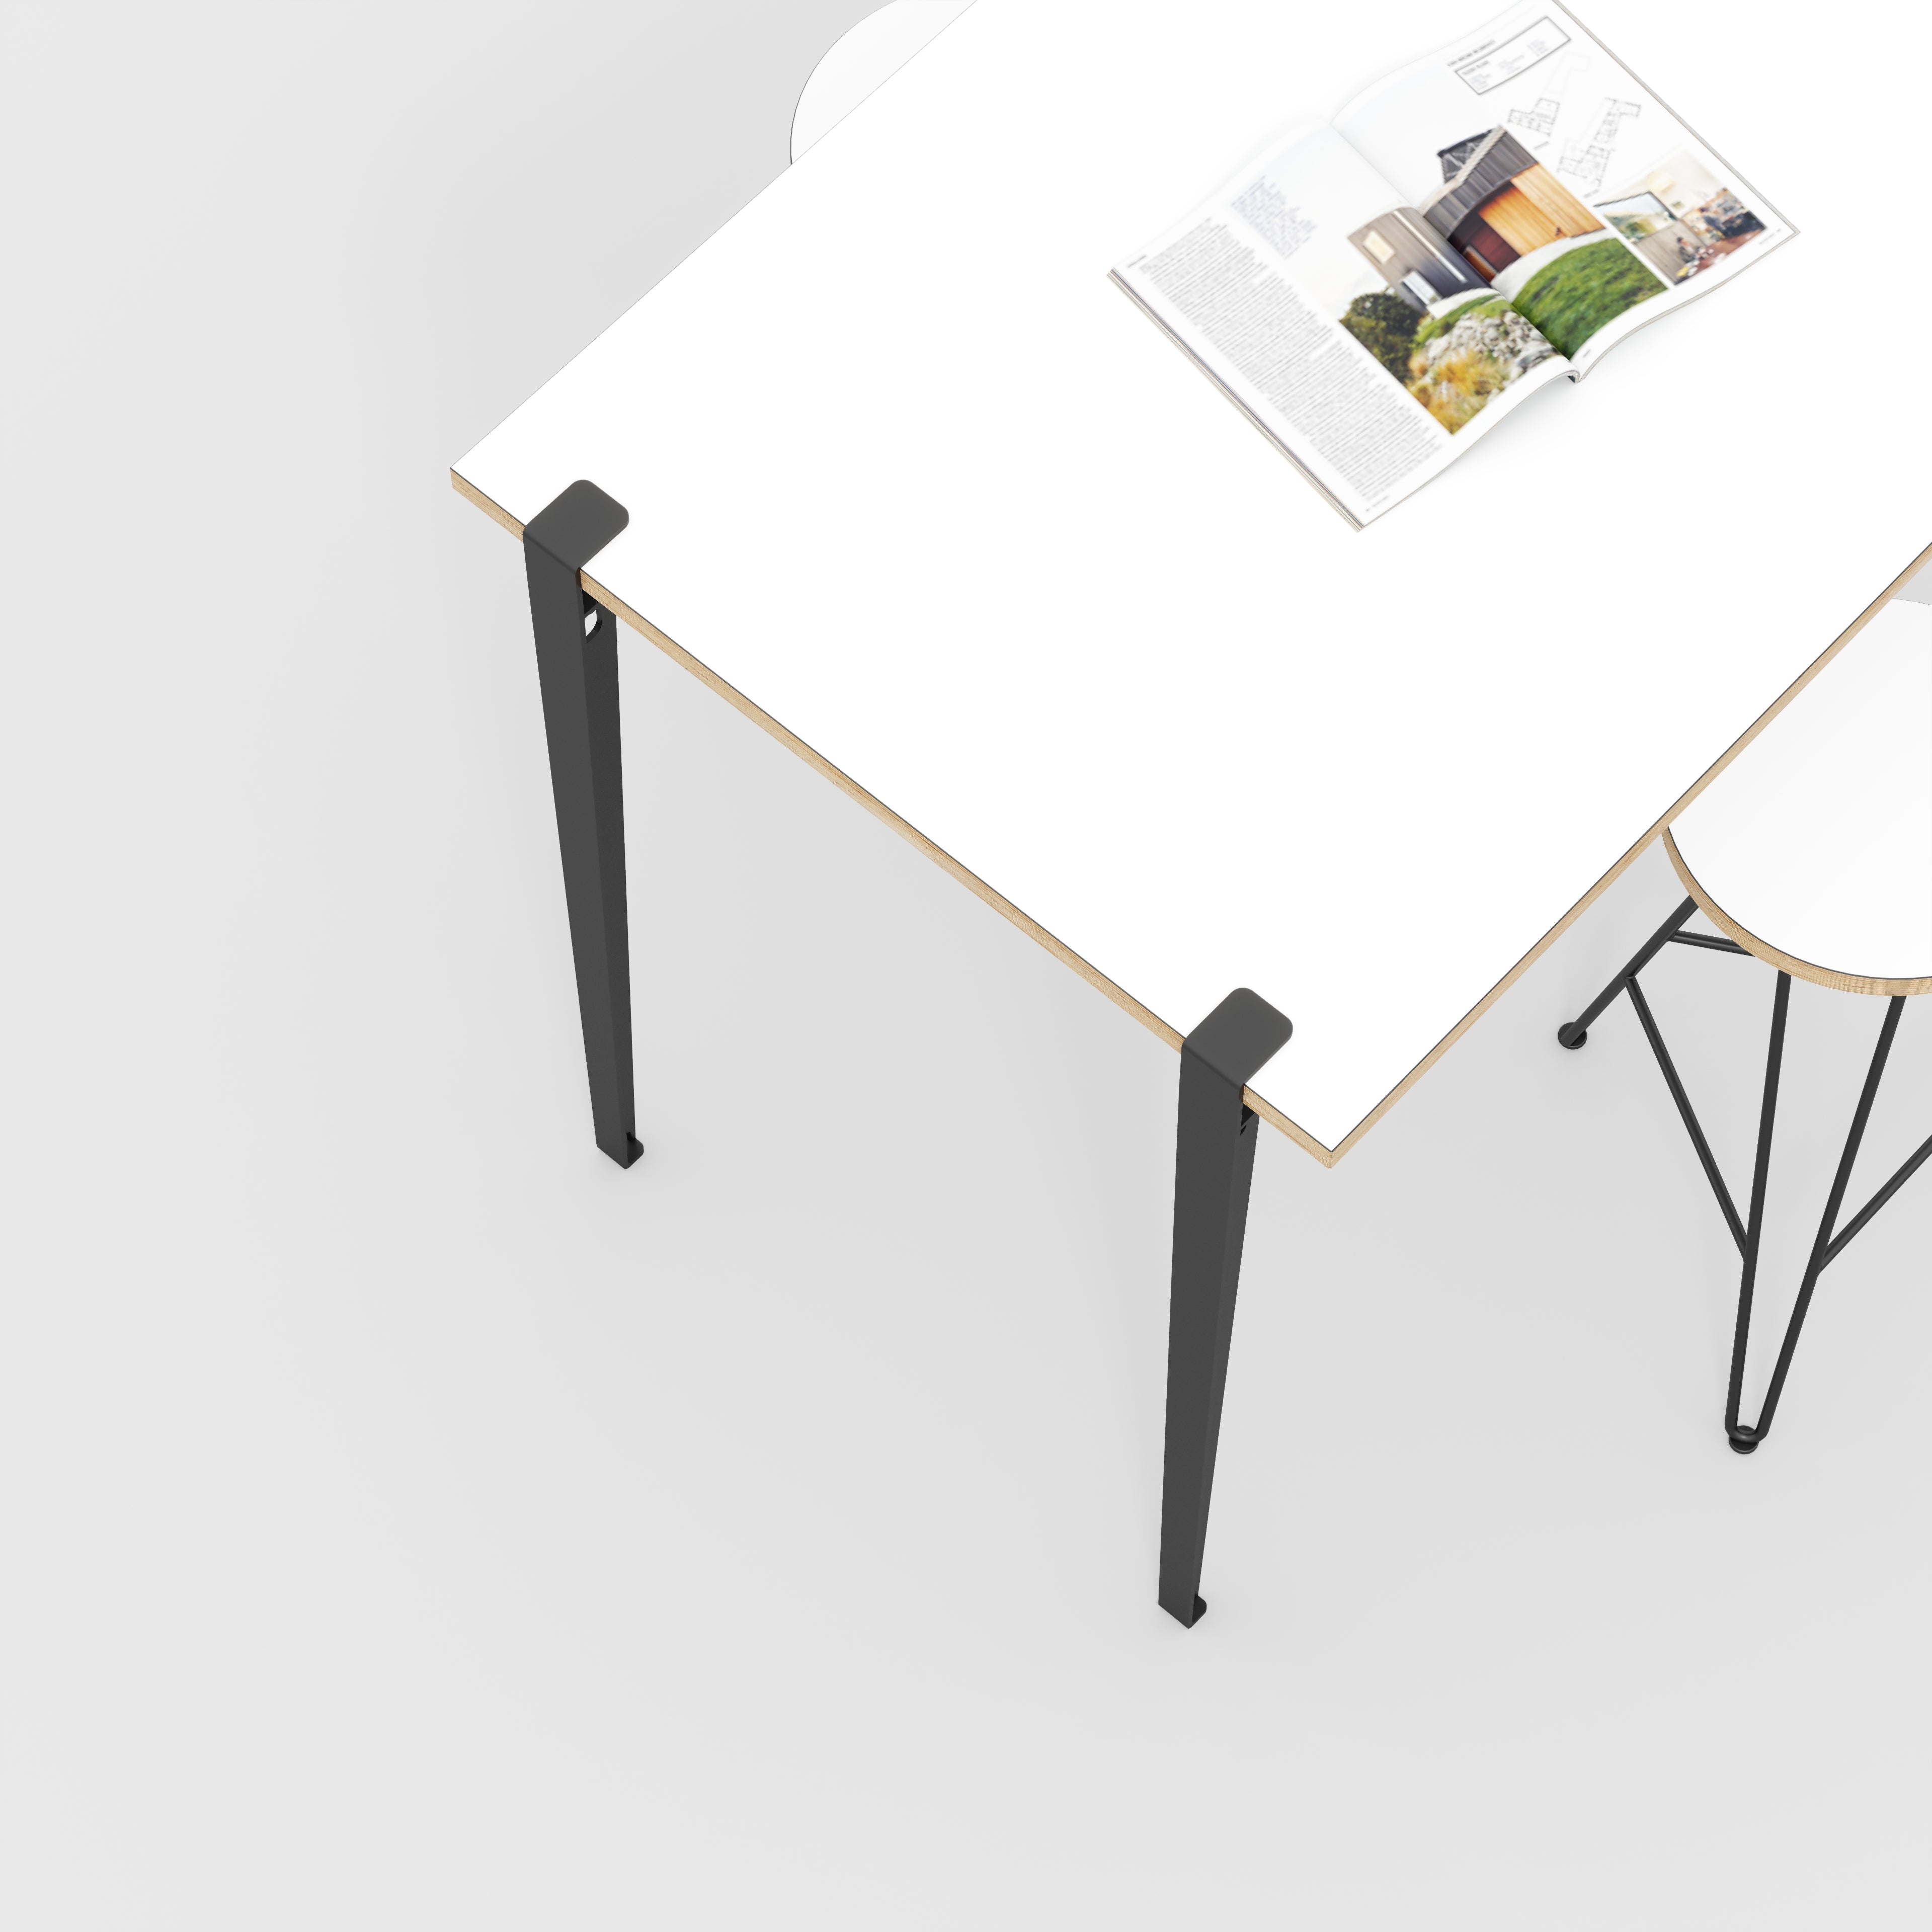 Wall Table with Black Tiptoe Legs and Brackets - Formica White - 1200(w) x 800(d) x 900(h)